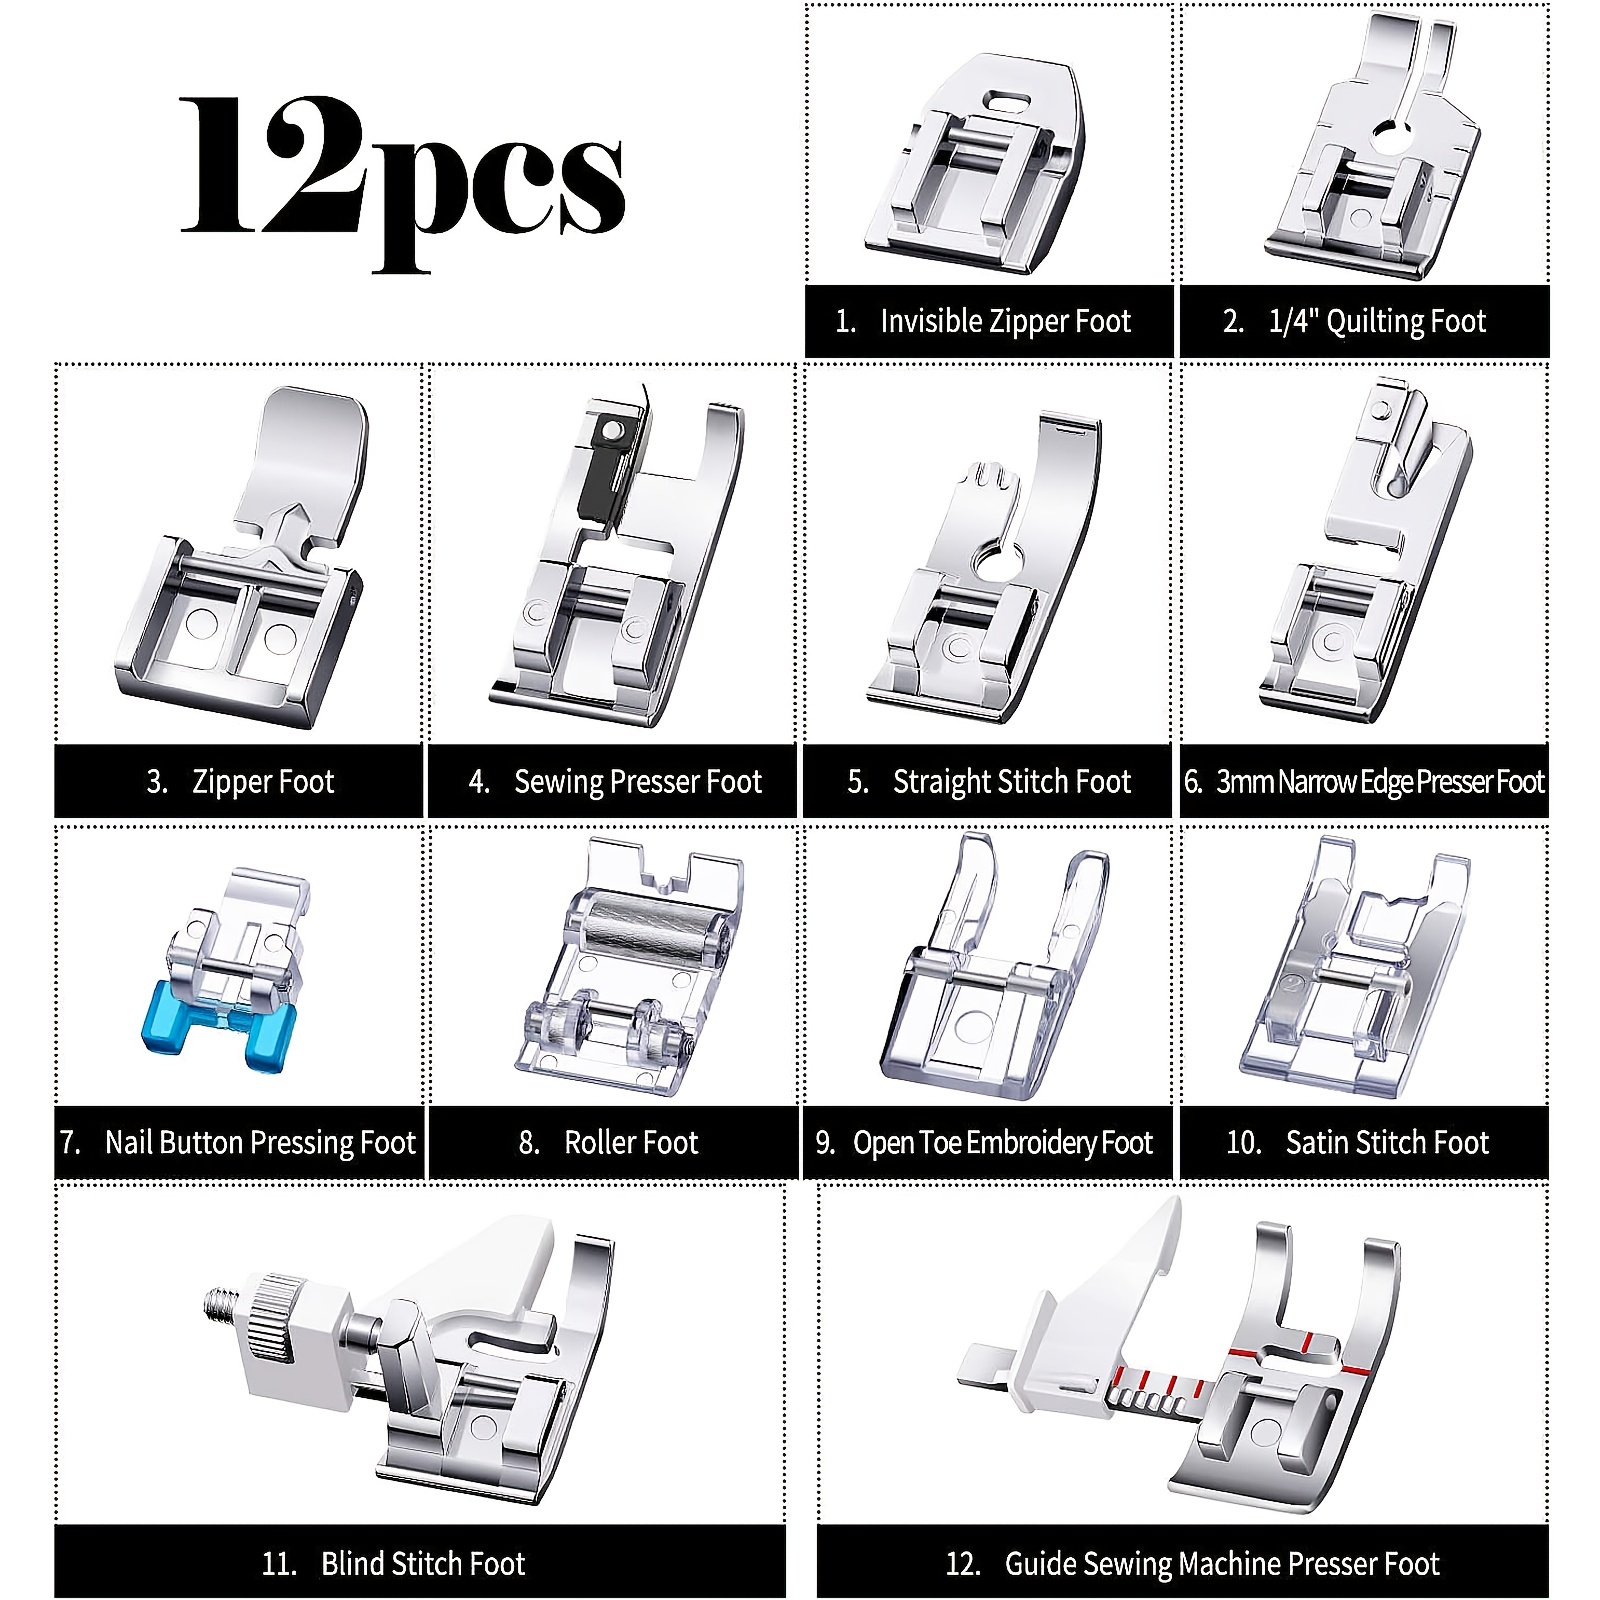 2Pcs household sewing machine parts presser foot 7306a invisible zipper foot  for singer brother janome juki toyota sa128